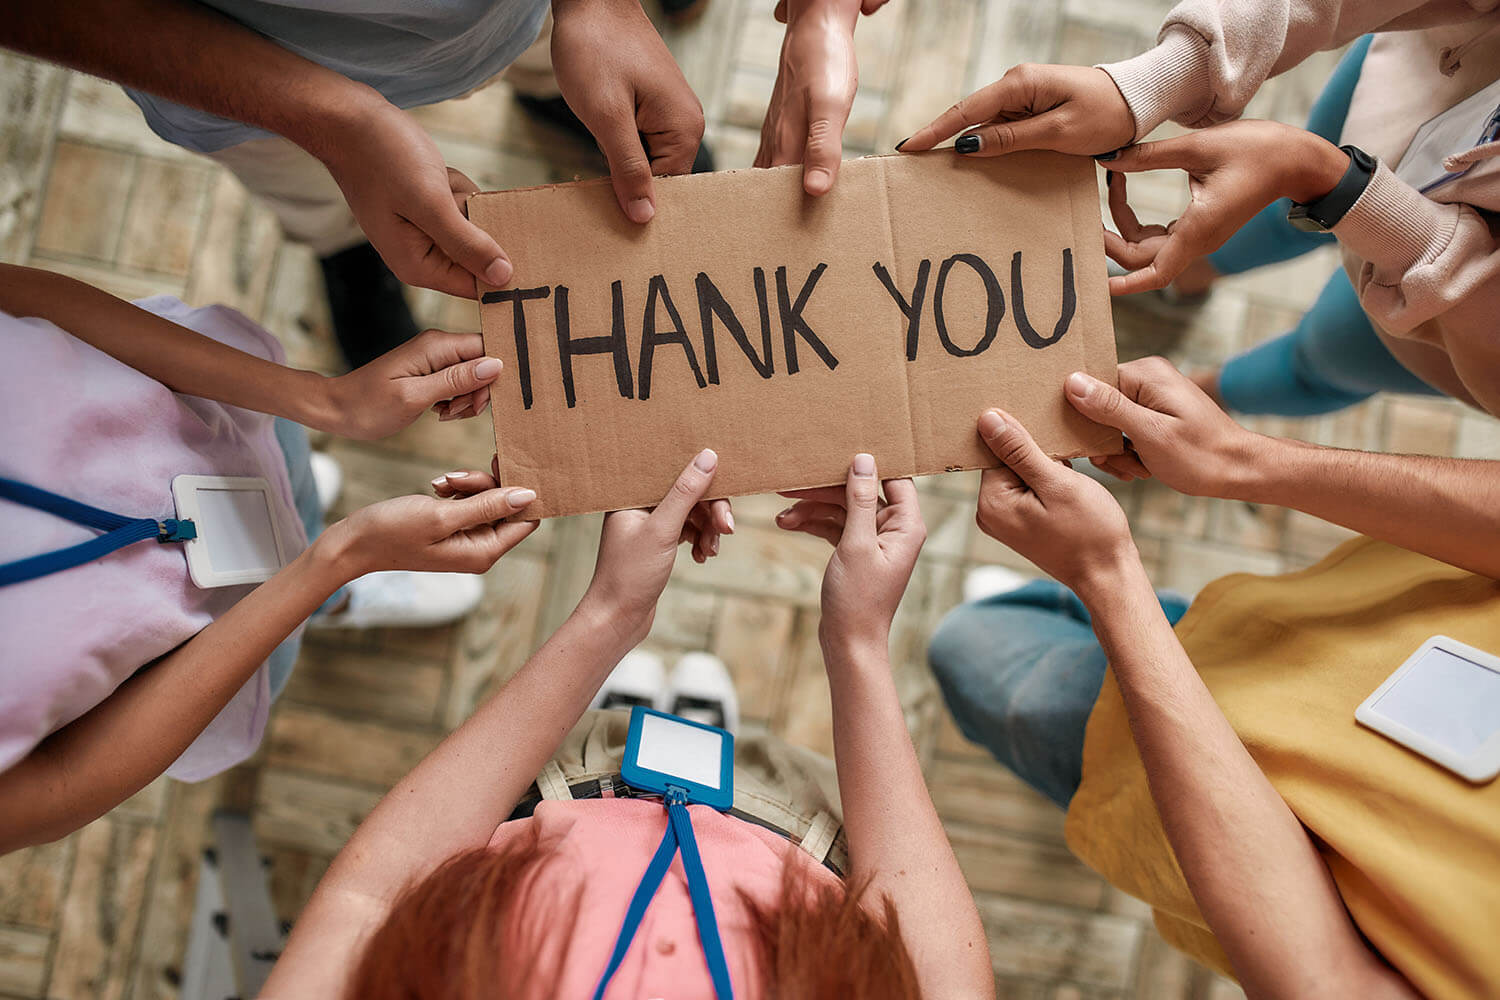 Close up of hands of a group of people holding a "Thank you" banner